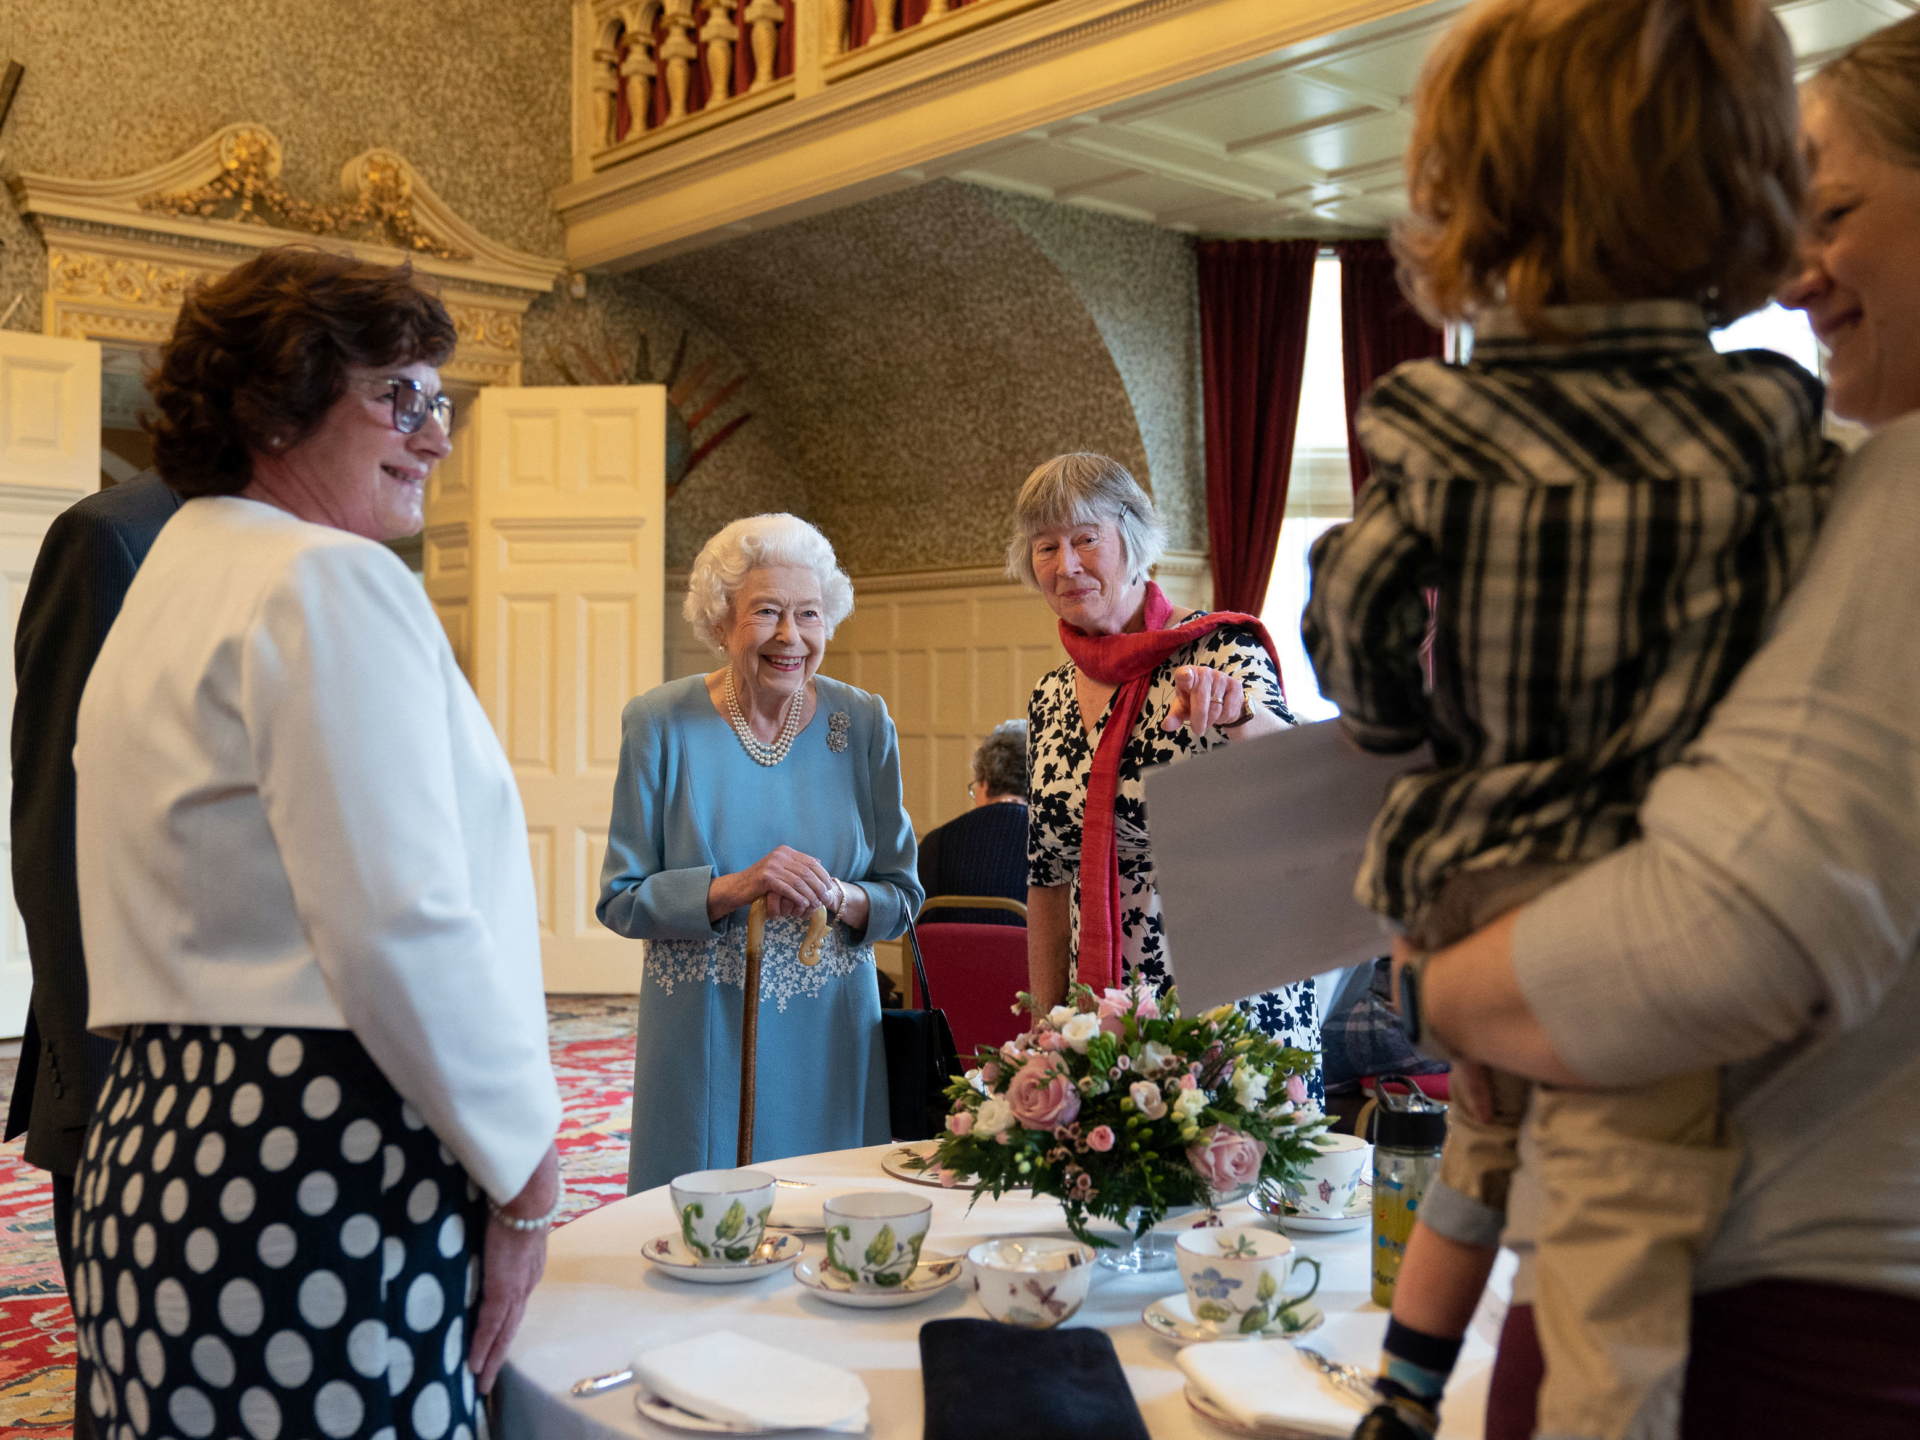 TOPSHOT - Britain's Queen Elizabeth II (centre left) speaks with representatives from local community group Little Discoverers as she celebrates the start of the Platinum Jubilee during a reception in the Ballroom of Sandringham House, the Queen's Norfolk residence on February 5, 2022. - Queen Elizabeth II on Sunday will became the first British monarch to reign for seven decades, in a bittersweet landmark as she also marked the 70th anniversary of her father's death. (Photo by Joe Giddens / POOL / AFP) (Photo by JOE GIDDENS/POOL/AFP via Getty Images)